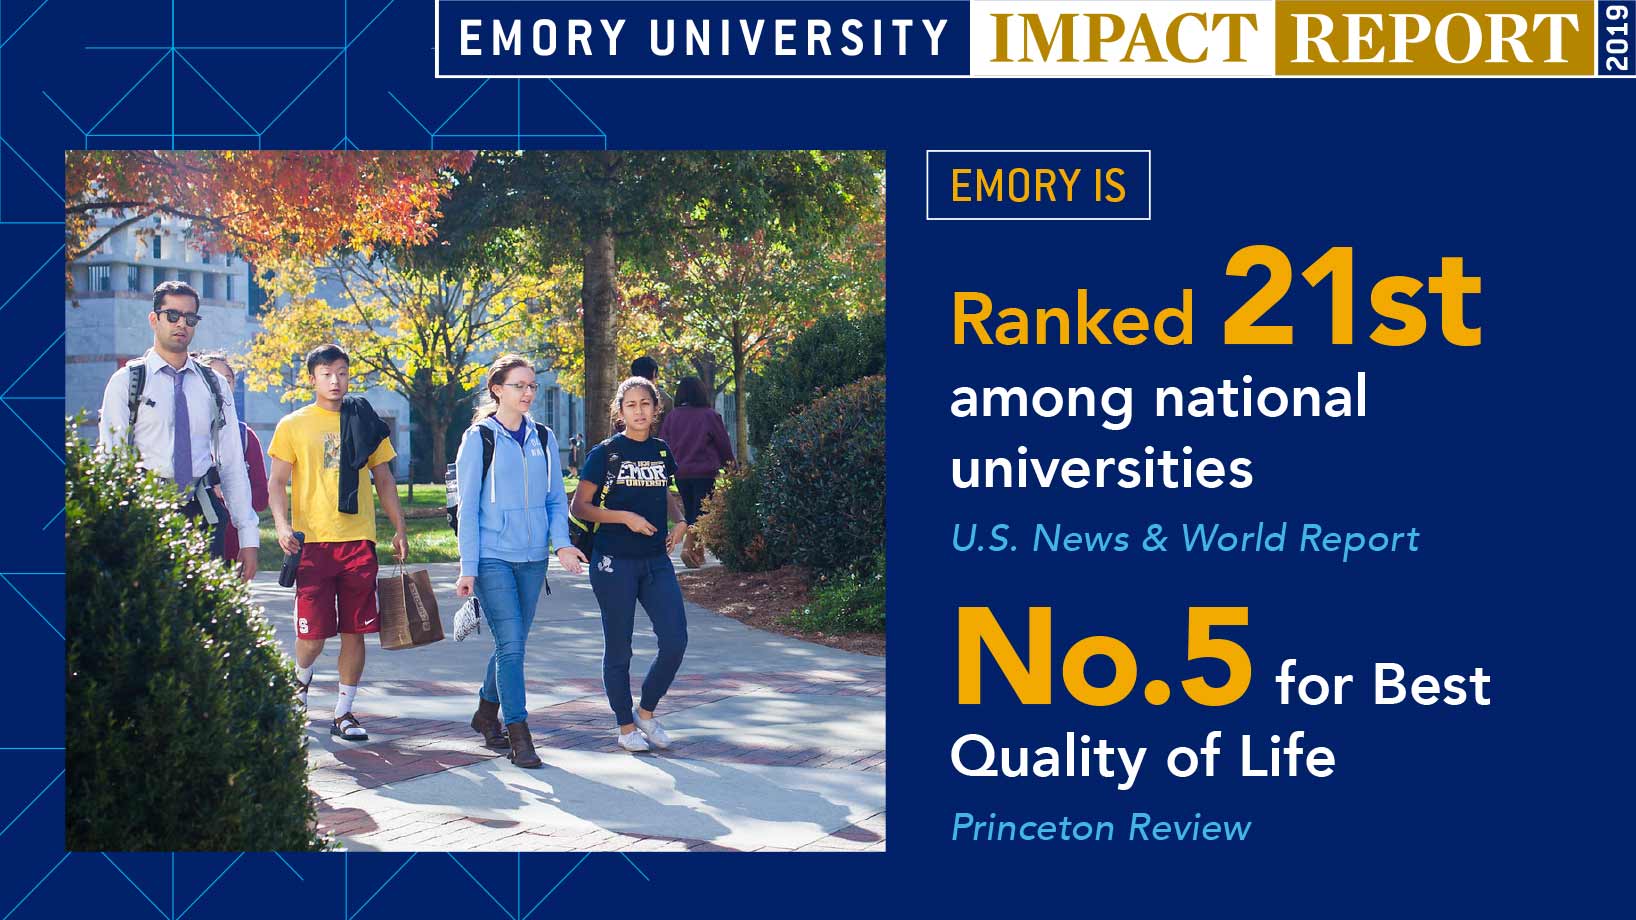 Emory is Ranked 21st among national universities (US News & World Report) No. 5 for Best Quality of Life (Princeton Review)